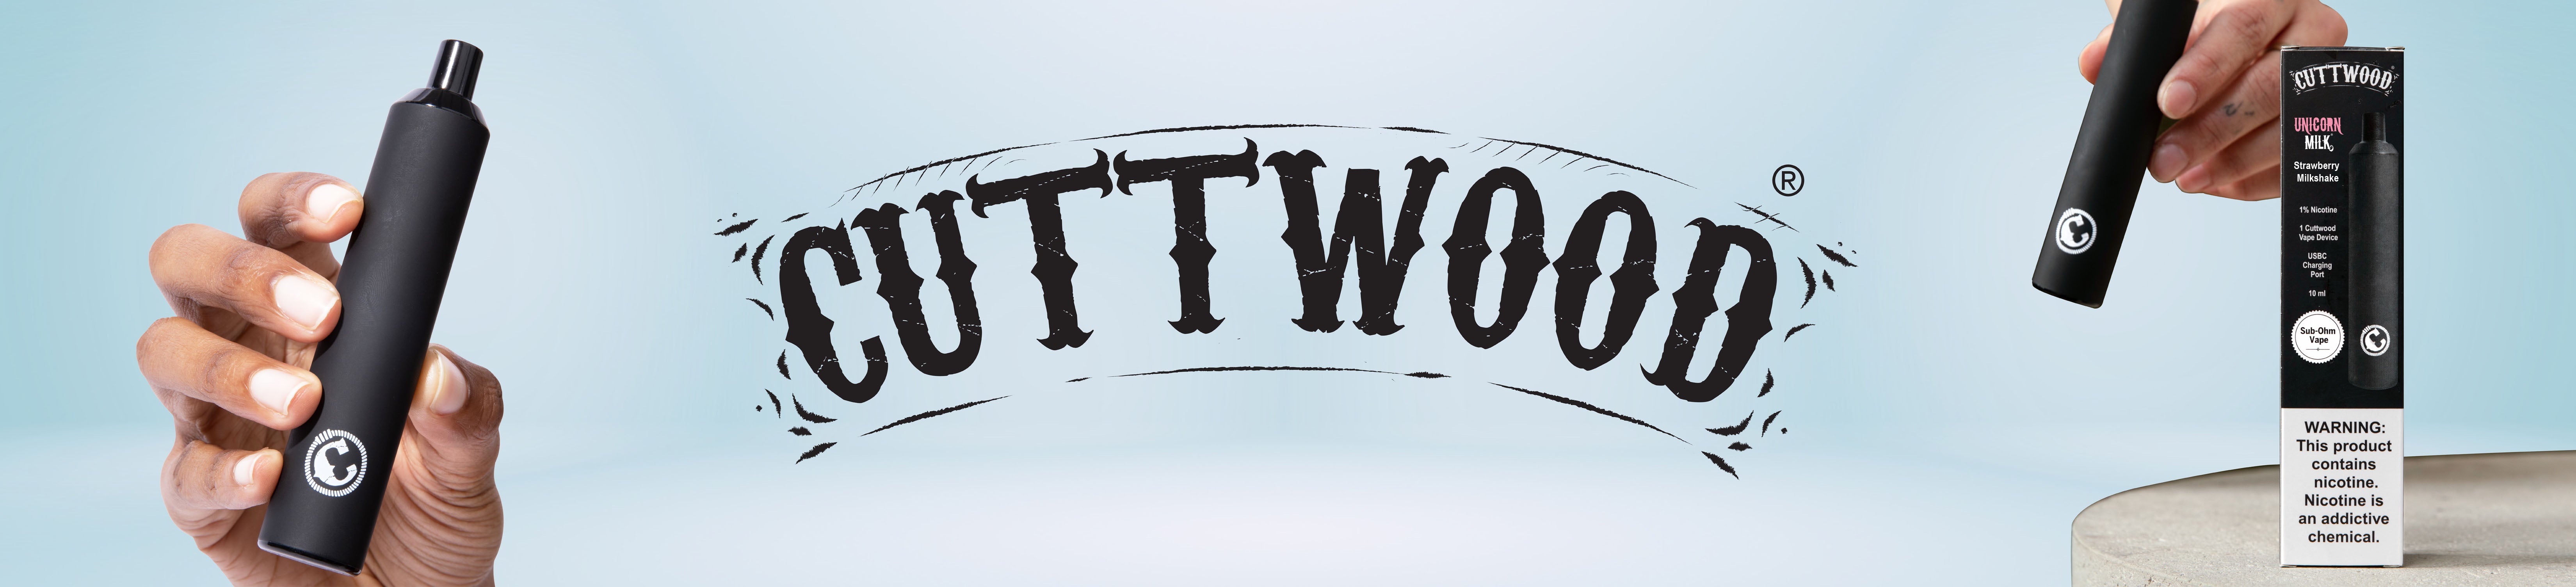 Cuttwood Collection Banner